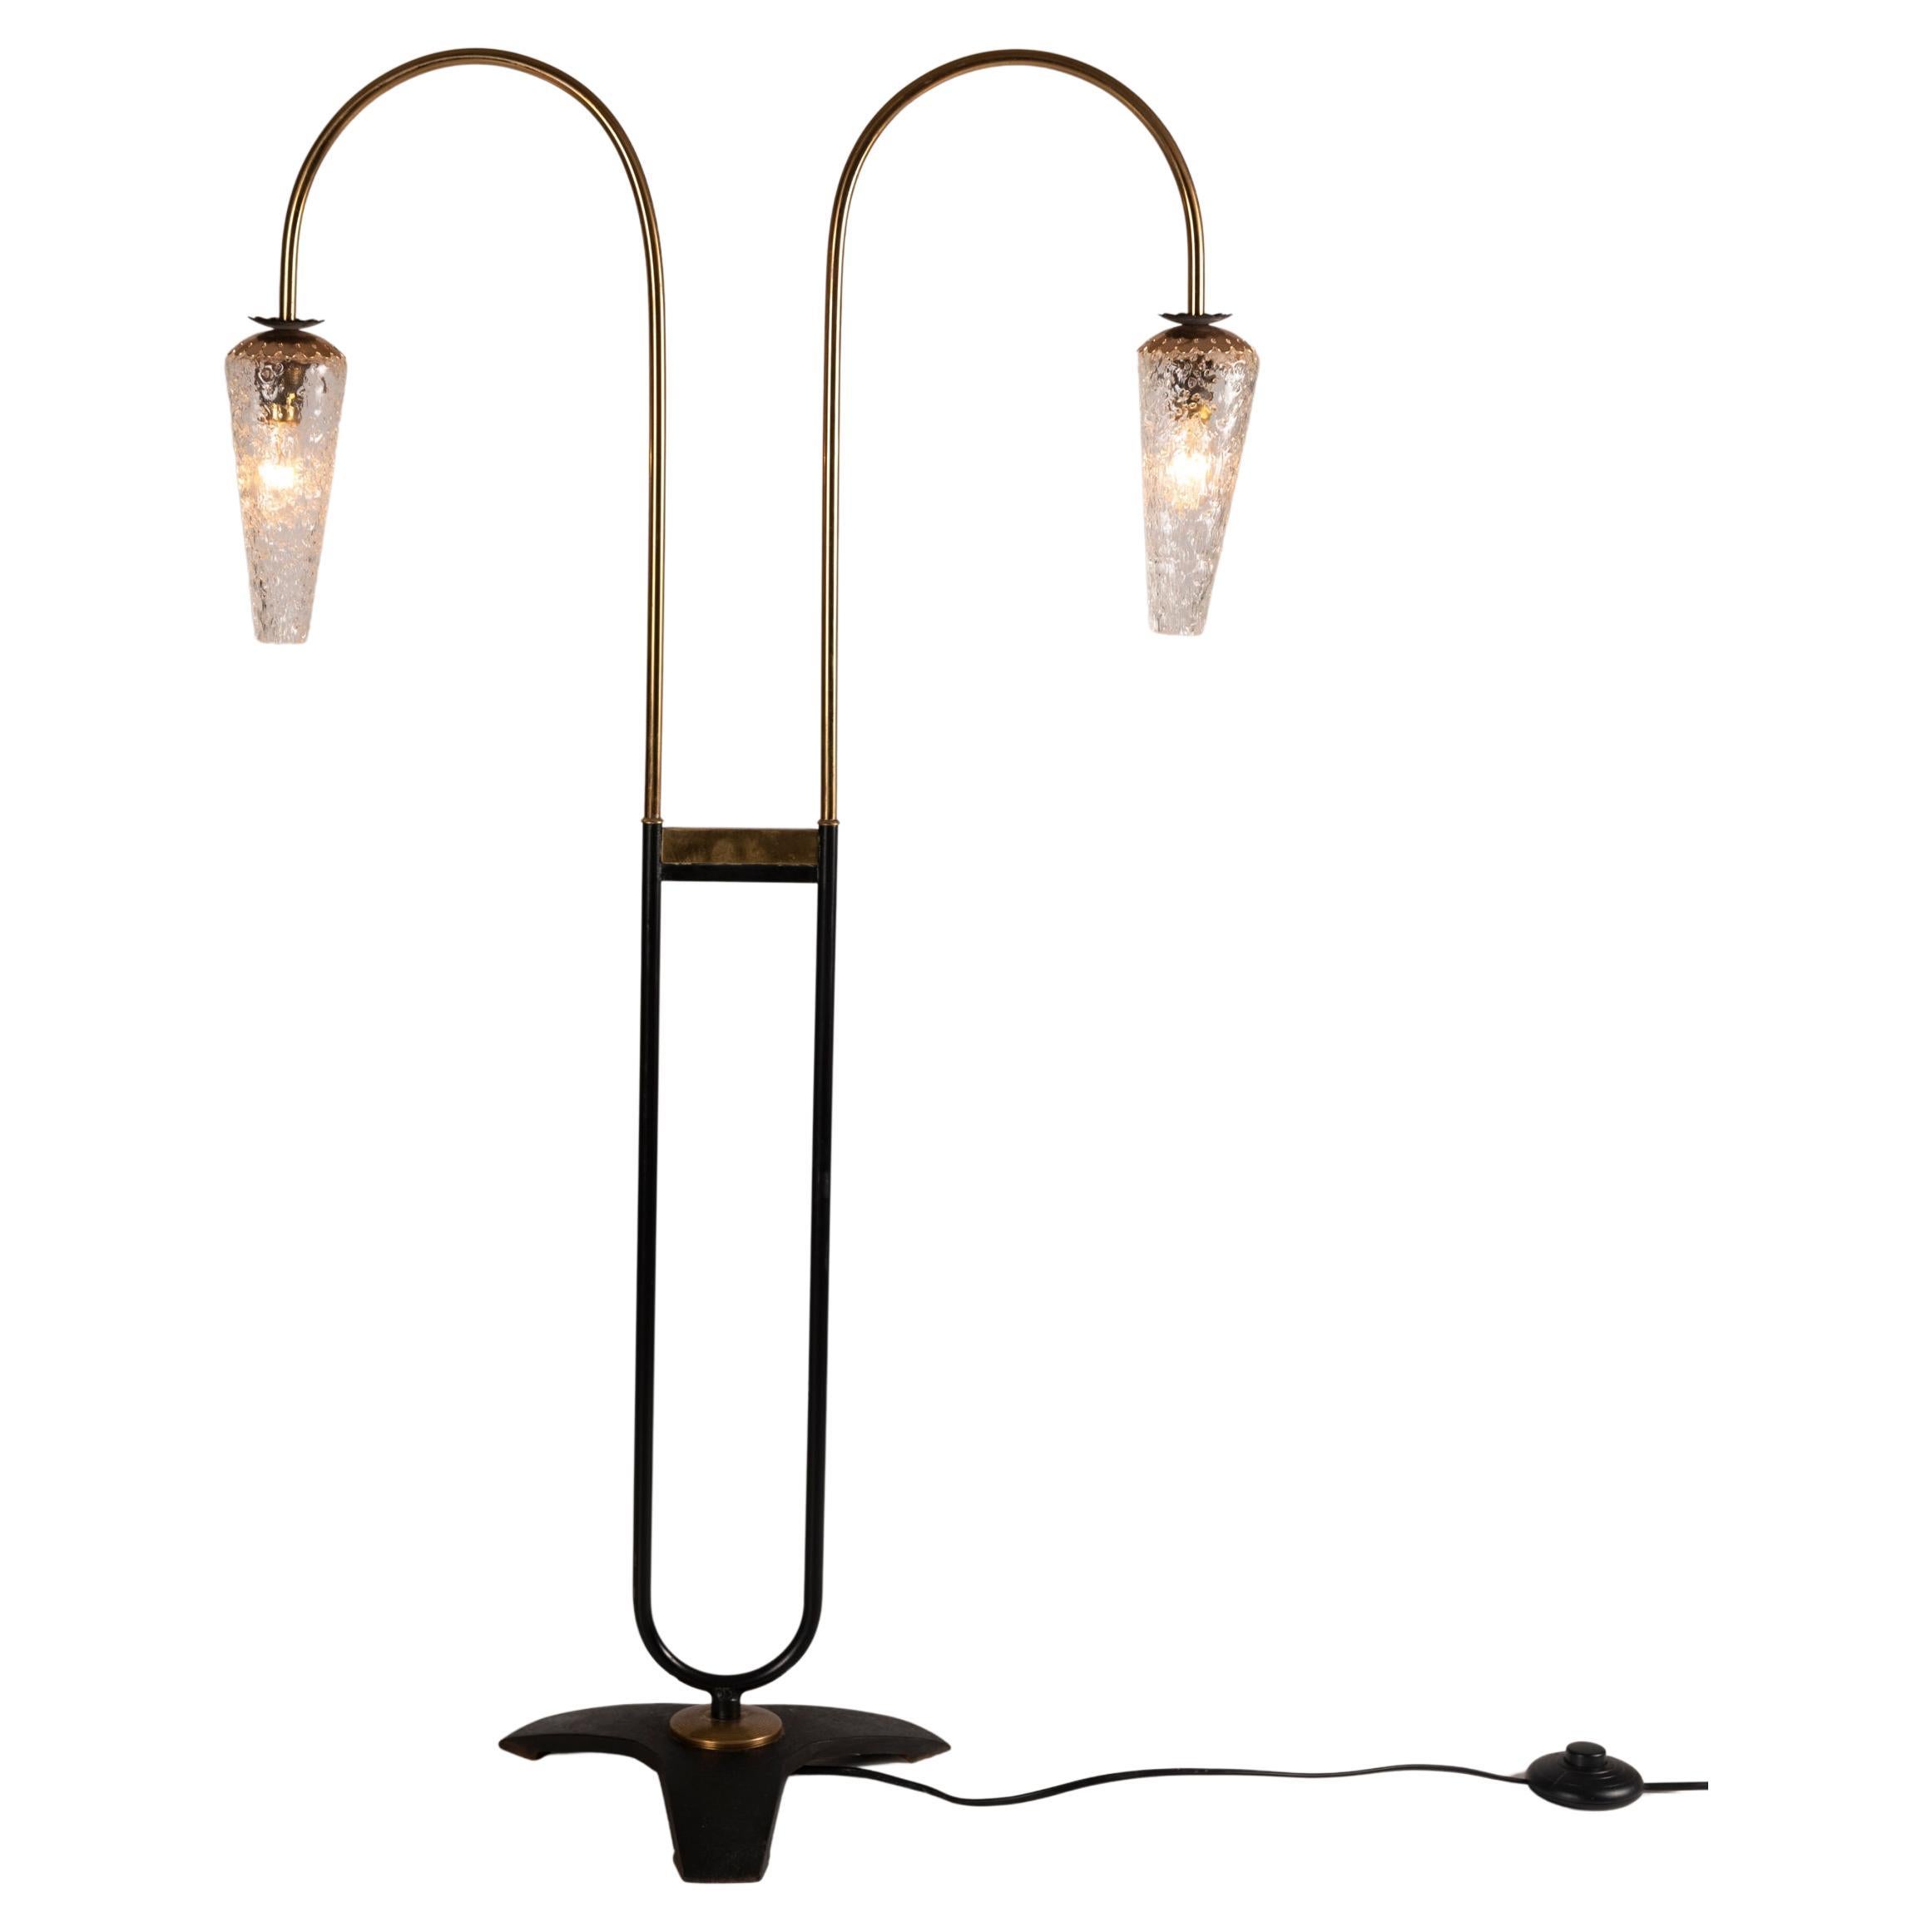 A Petit French brass and glass floor Lamp attributed to Lunel. 1950s